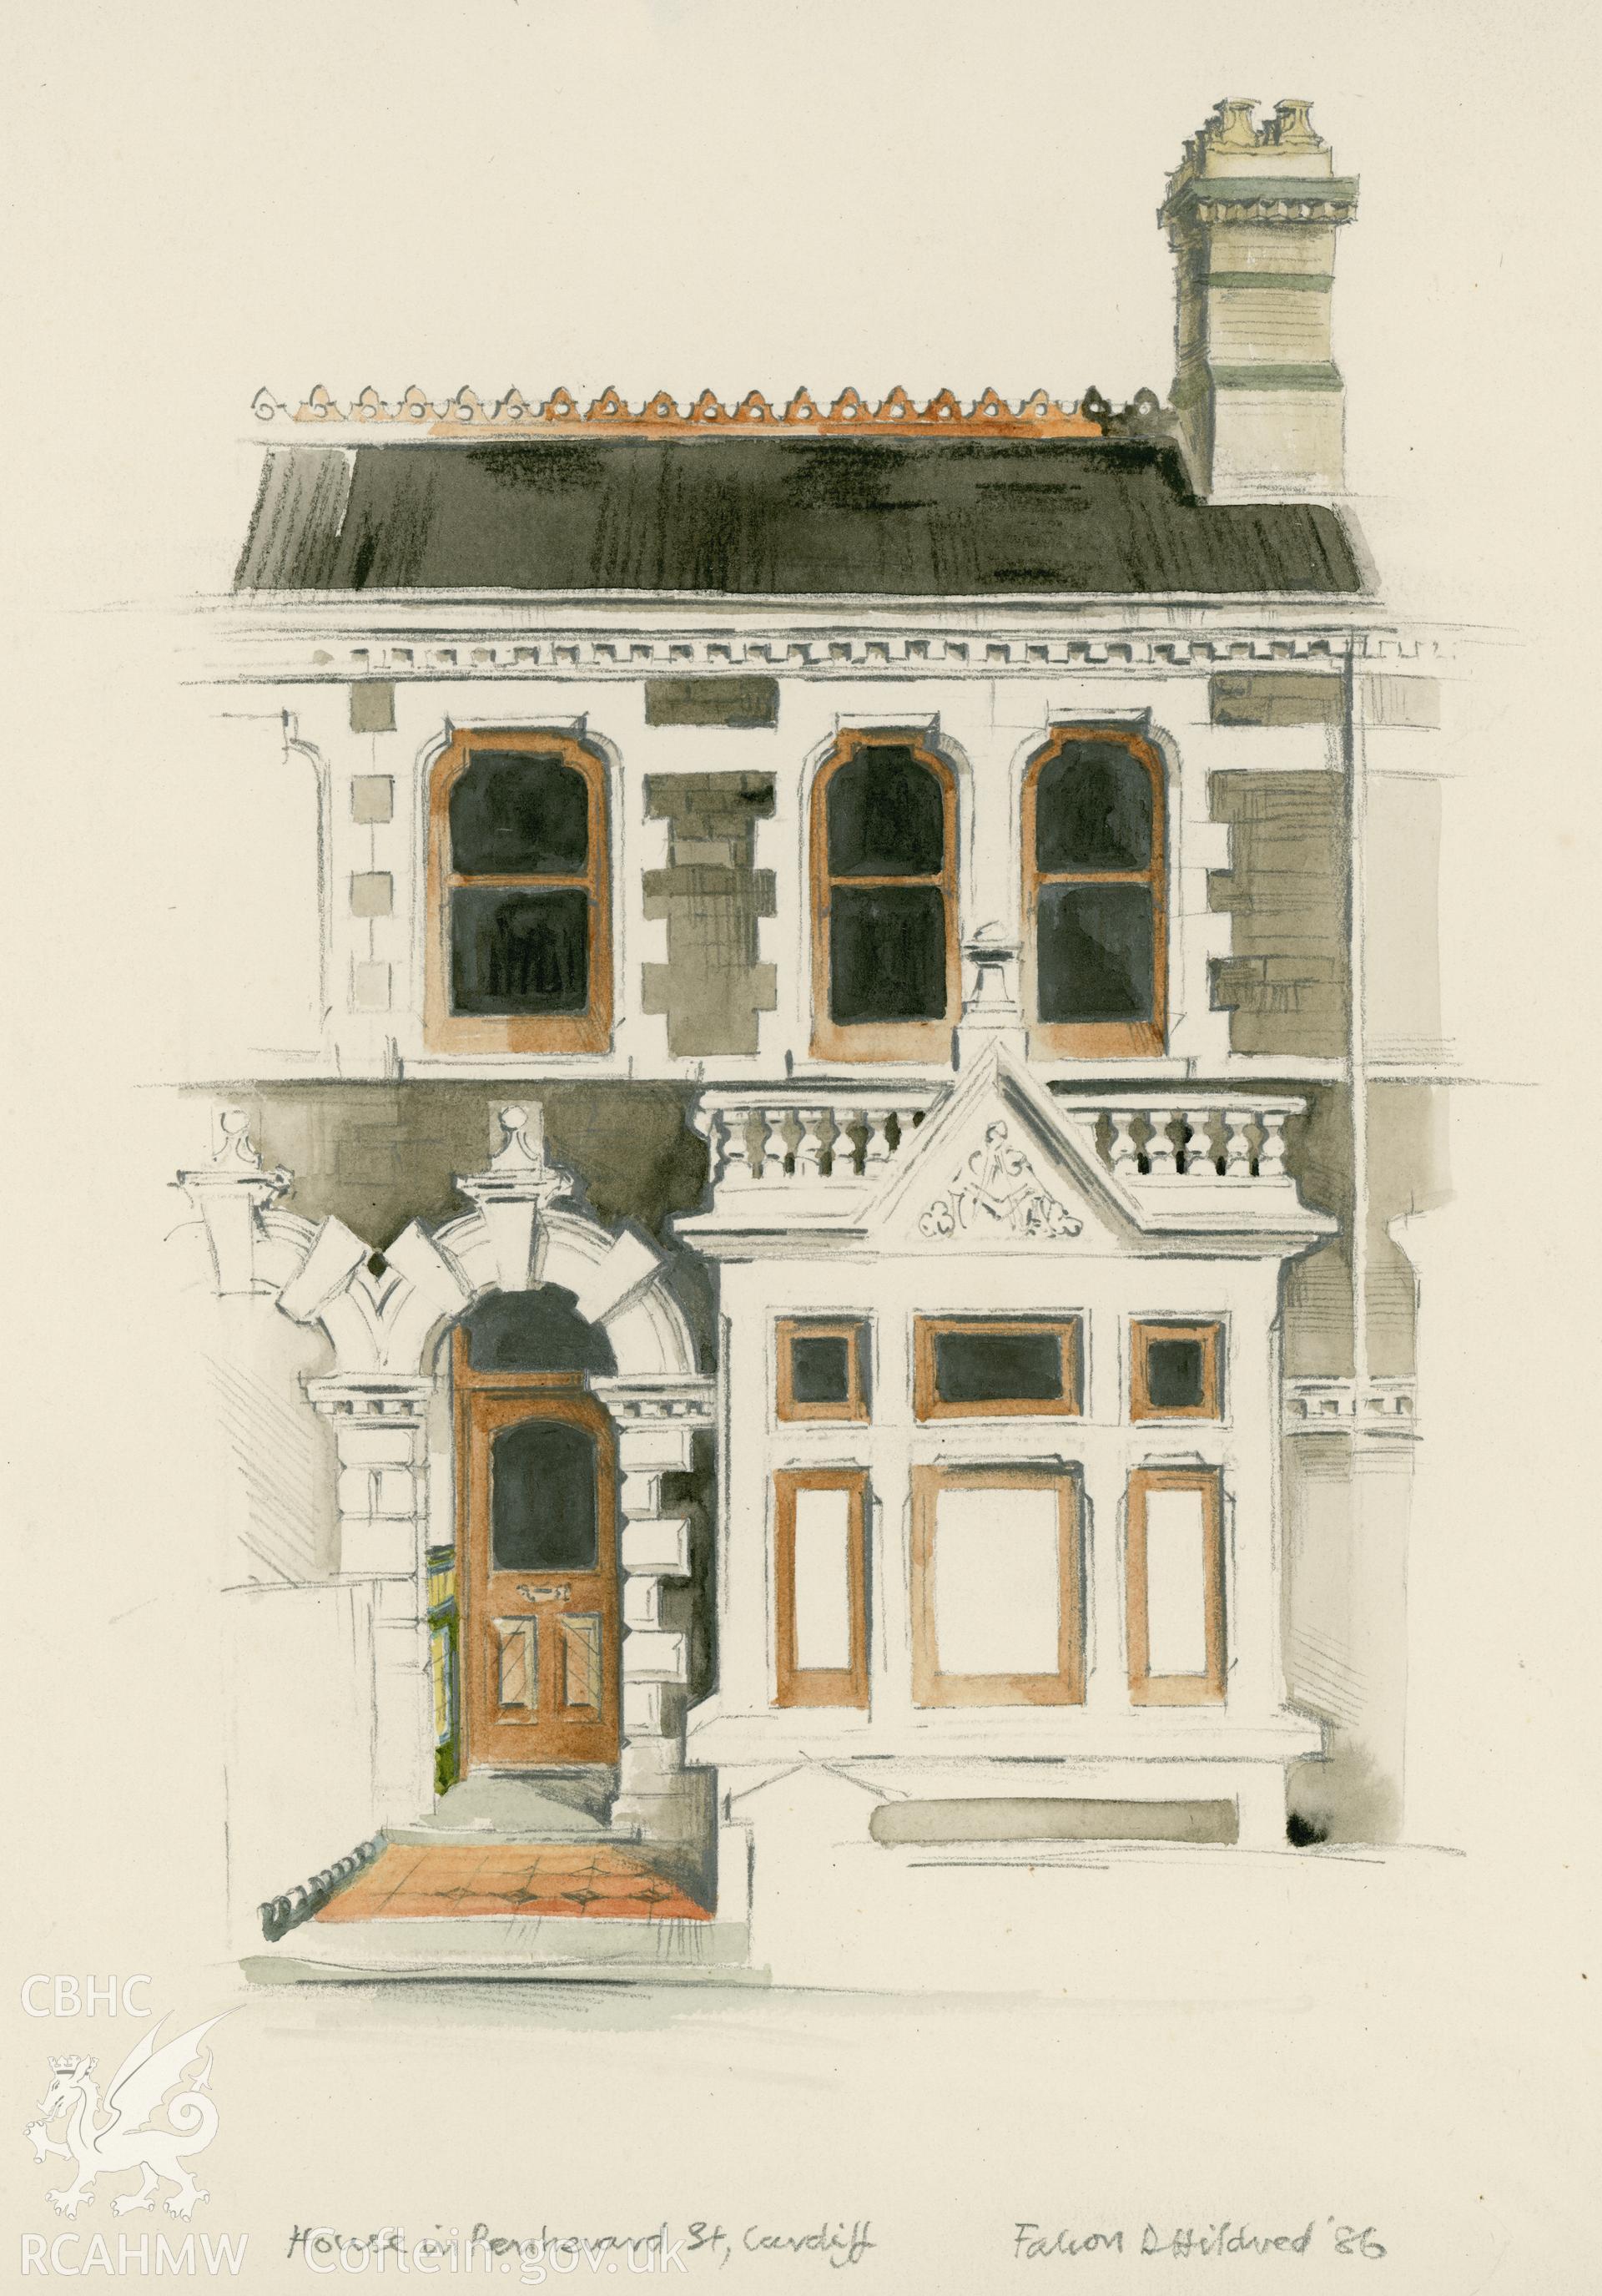 Cardiff - Houses in Penhevad Street: (pencil and watercolour) drawing.